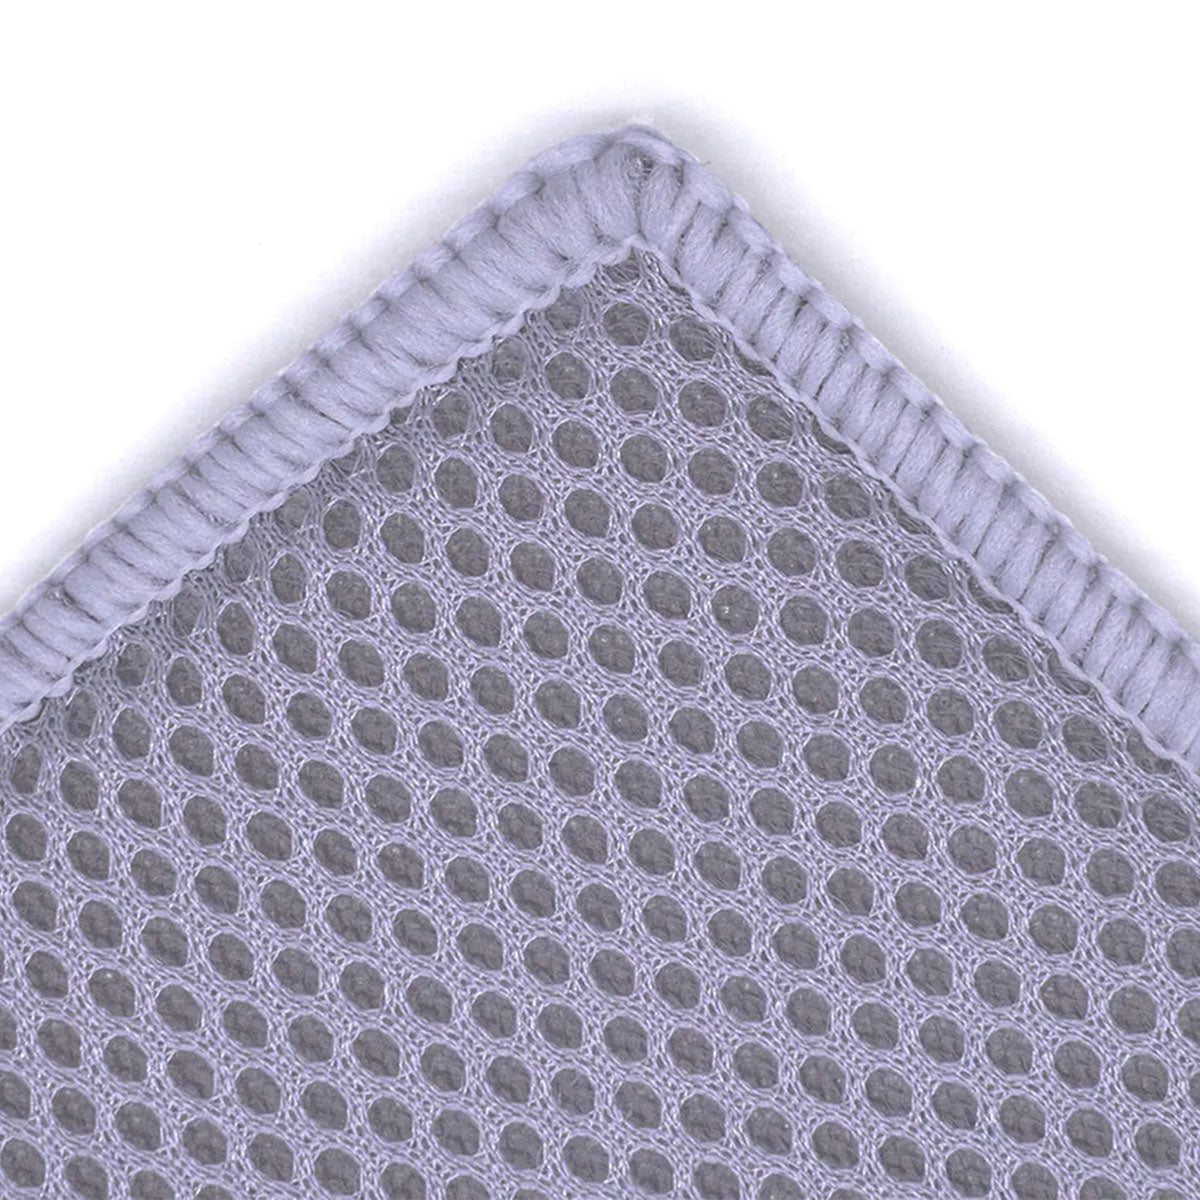 The collection Mesh Pad